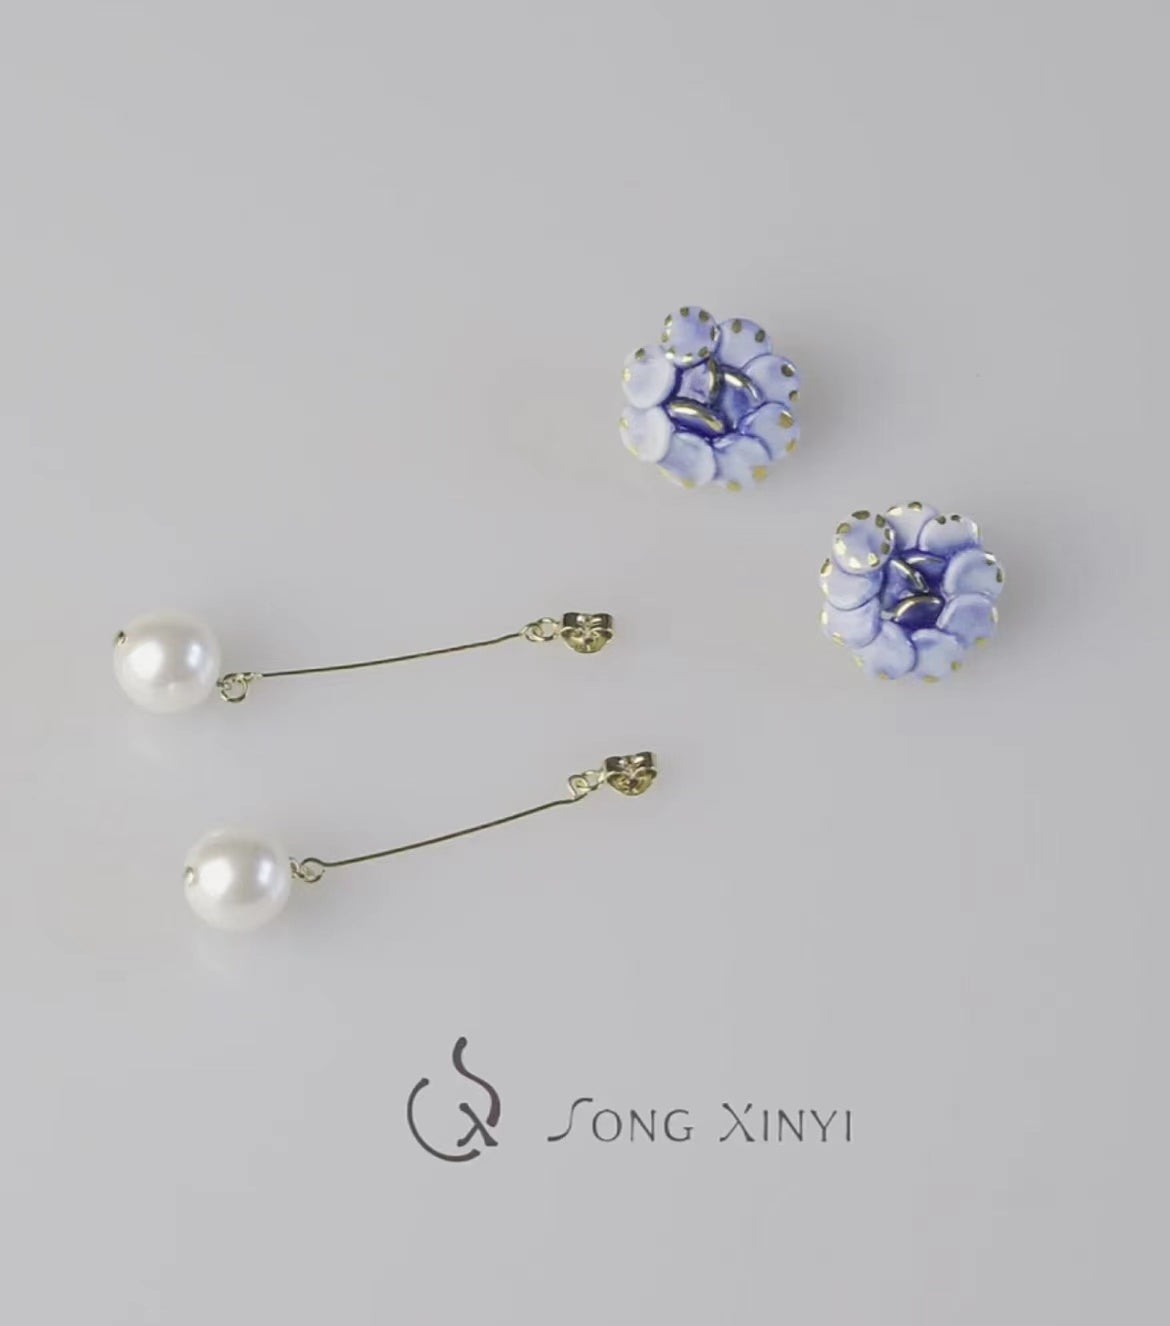 Song "Blue Petal With Pendant"Handmade Ceramic And Pearl Earrings